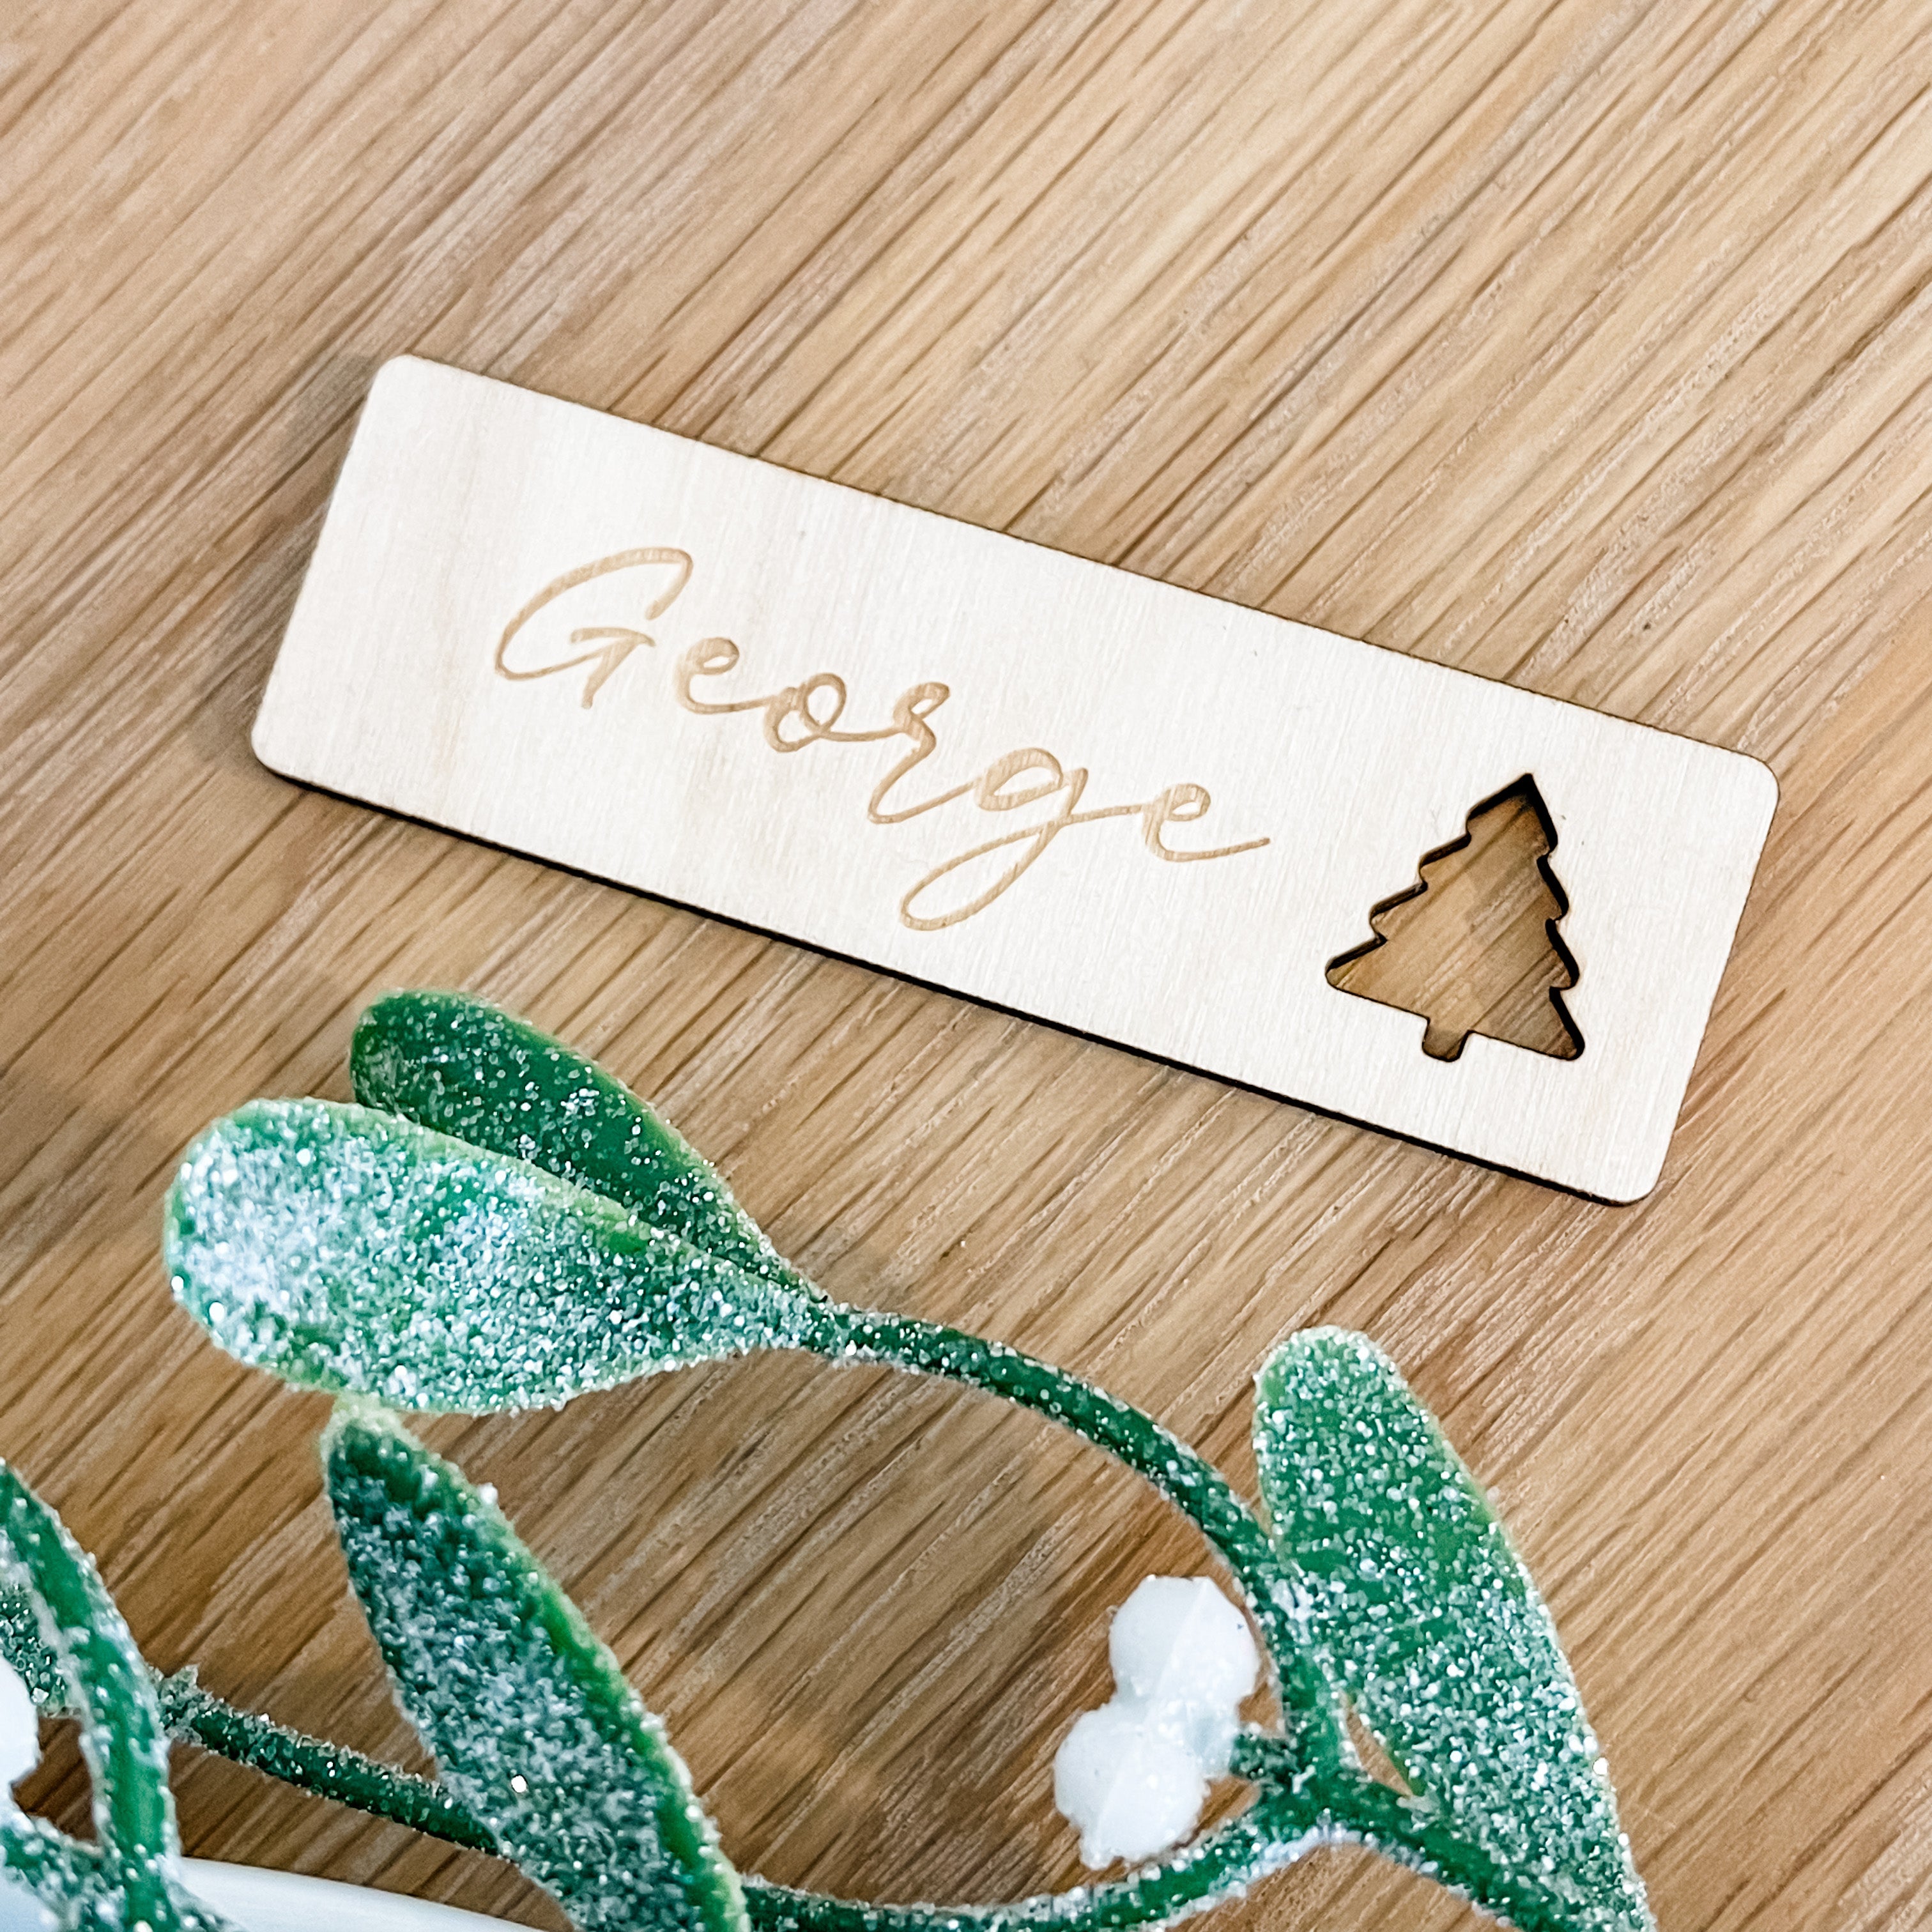 Festive Personalised Place Cards